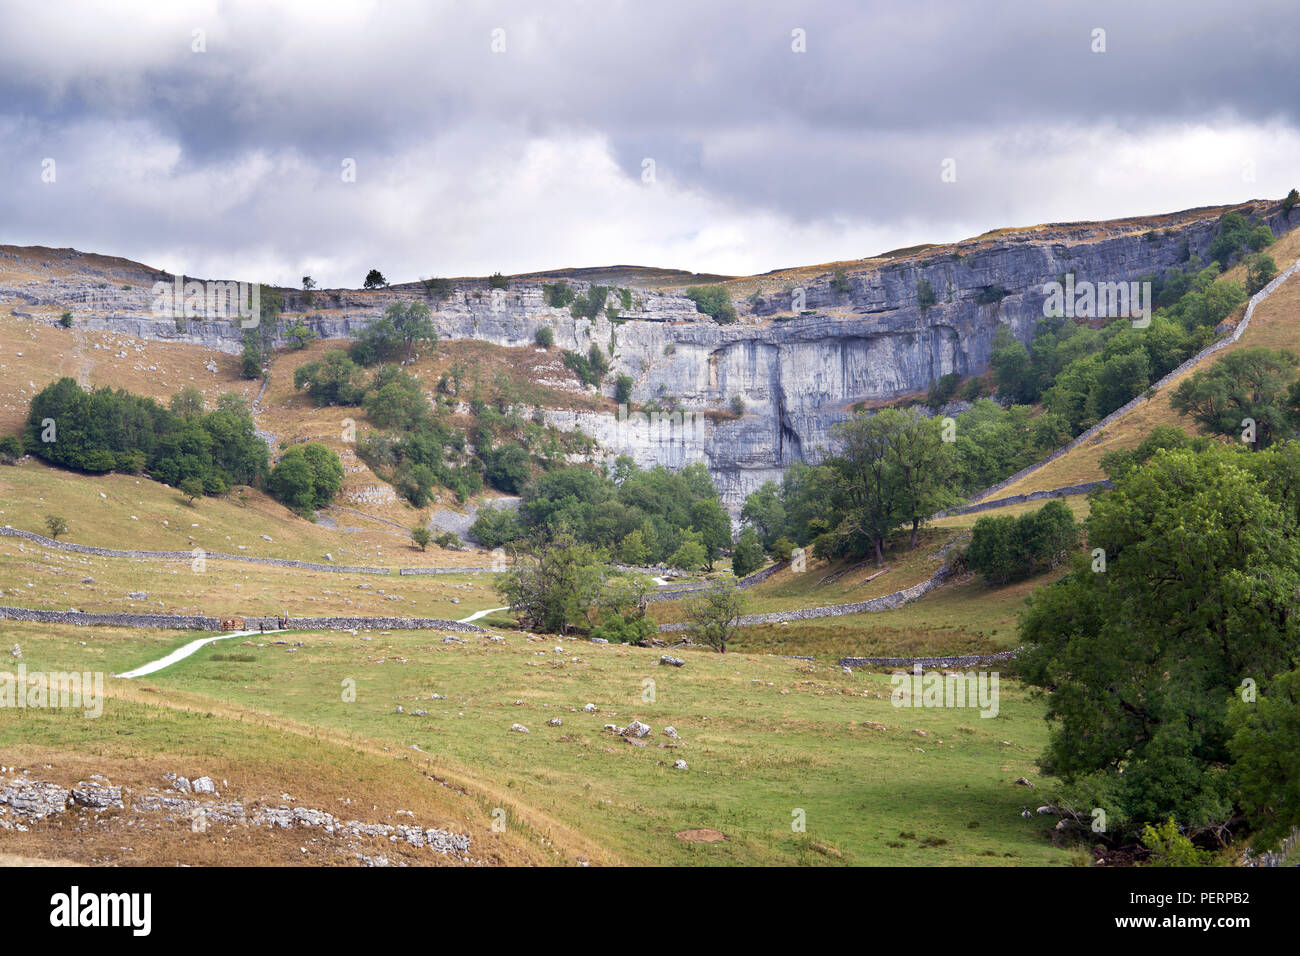 Malham Cove in the Yorkshire Dales was created at the end of the last Ice Age by a waterfall carrying meltwater from glaciers. Stock Photo